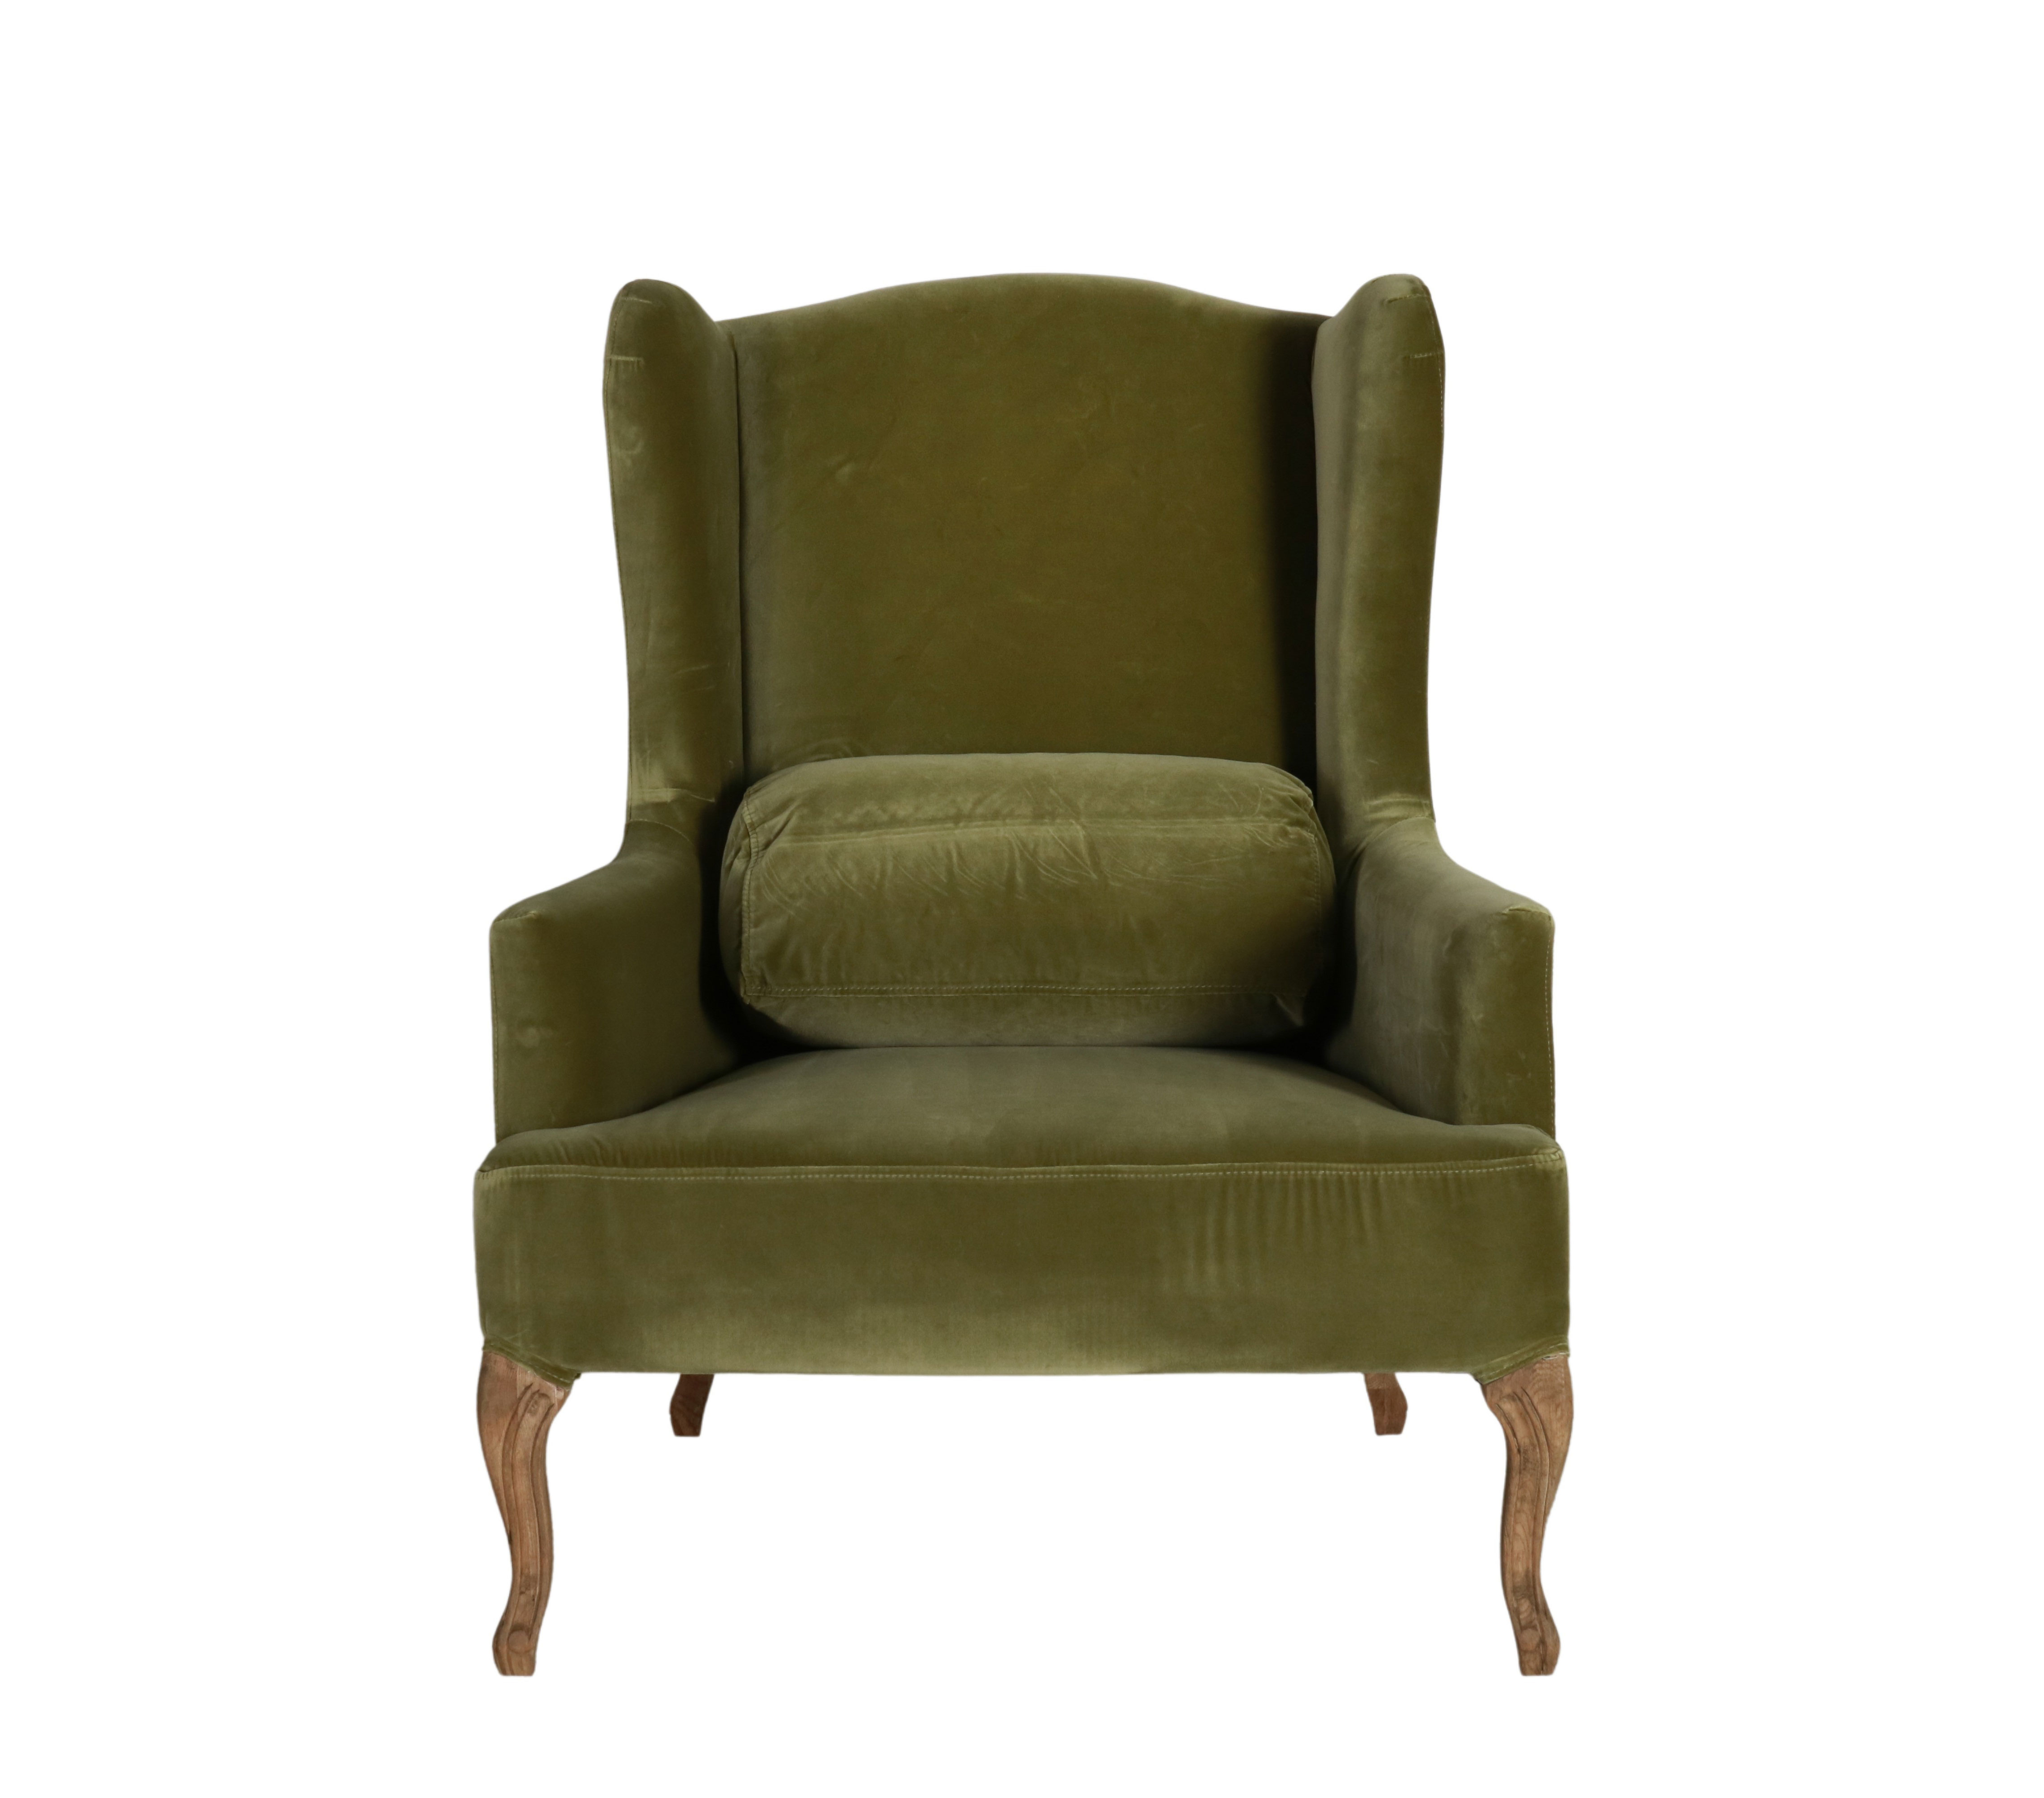 Green velvet wingback chair with oak legs Château collection